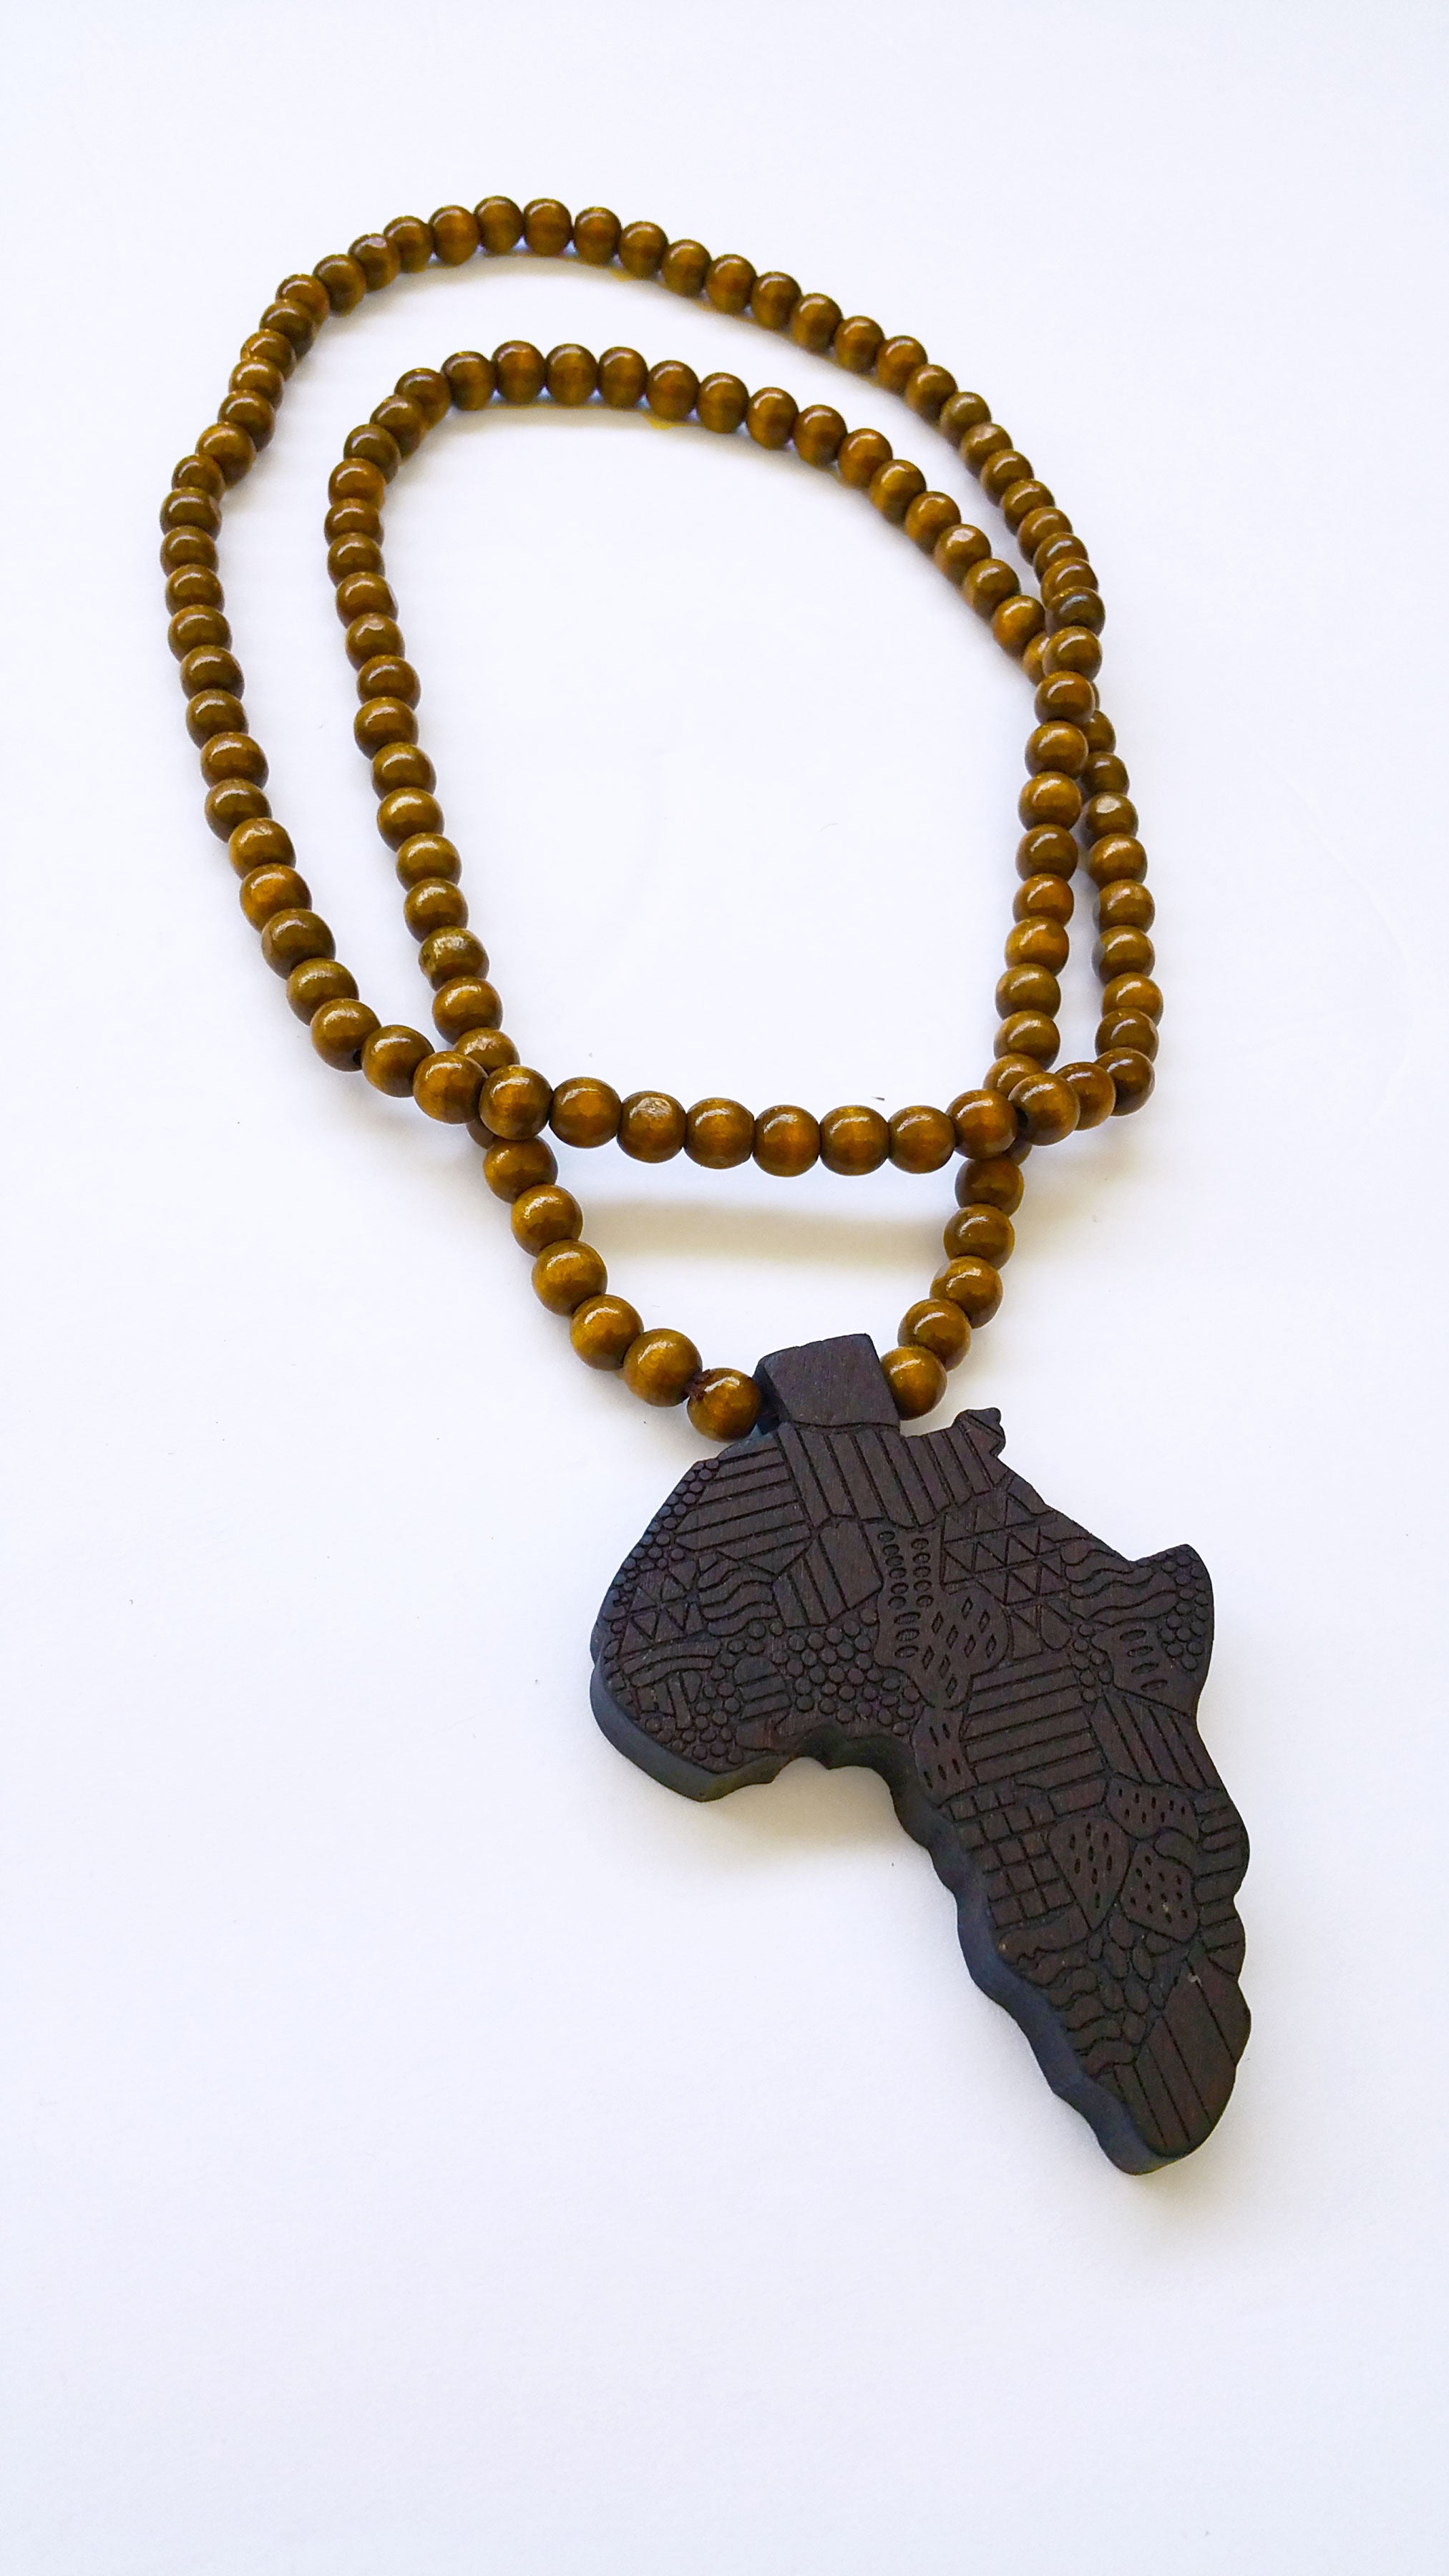 31" African Wood Bead Laser Cut Medallion Necklace